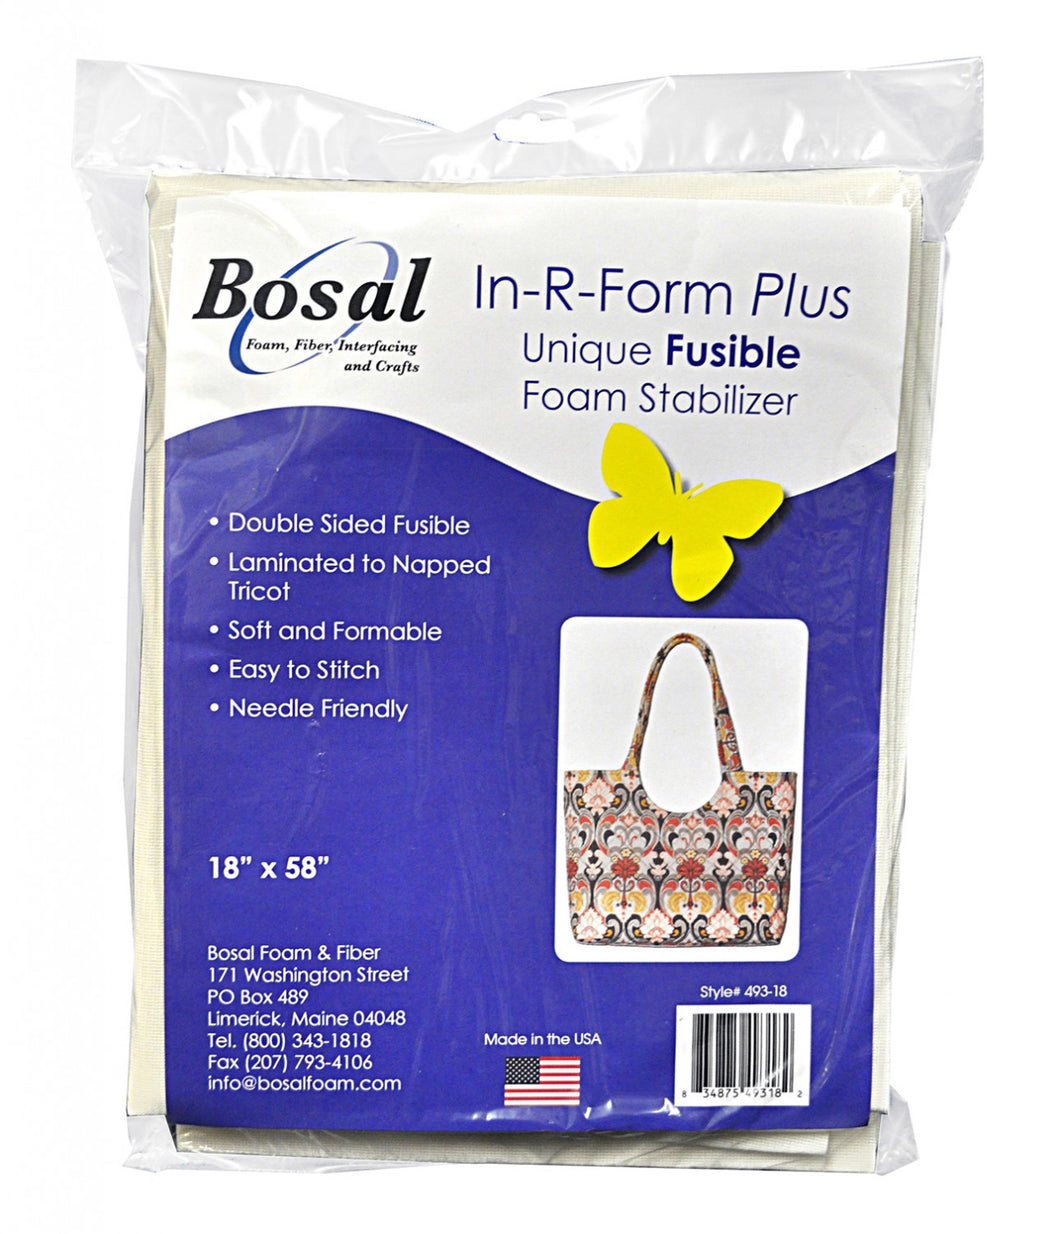 In-R-Form Plus Double Sided Fusible Foam Stabilizer, # 493B-18